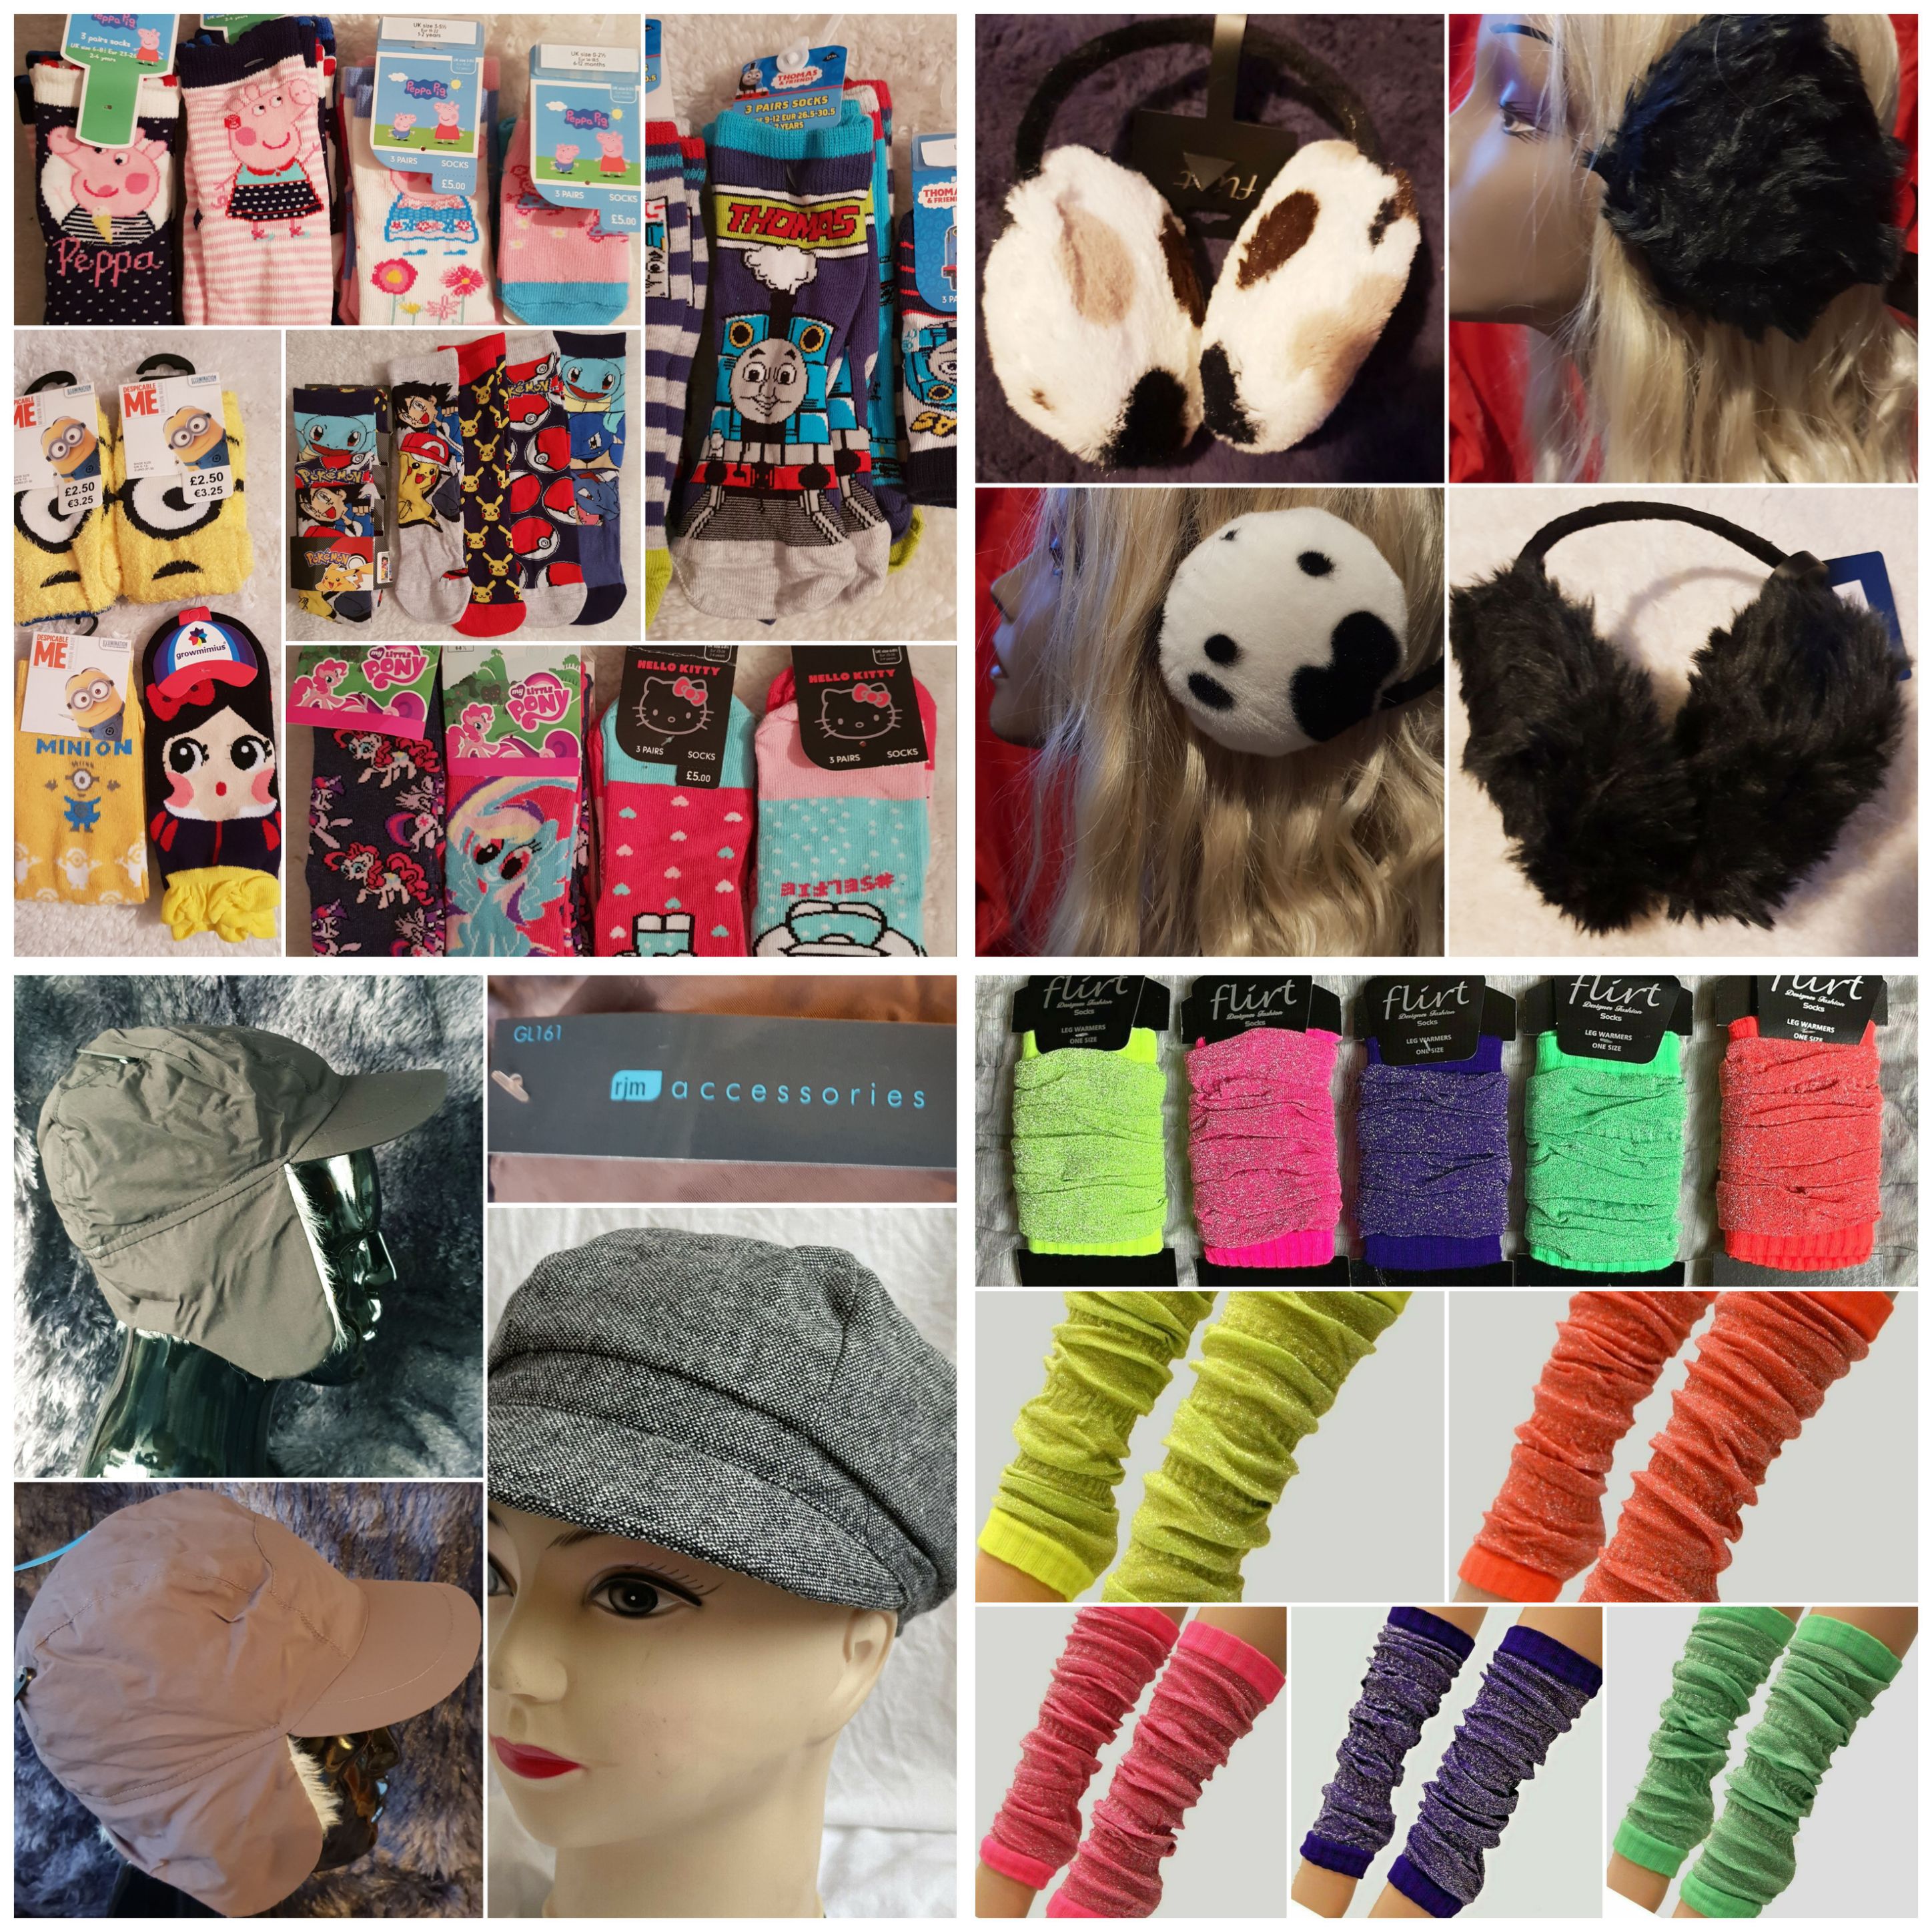 Childrens Accessories 98 pcs Hats / Tights / Character Socks / Accessories